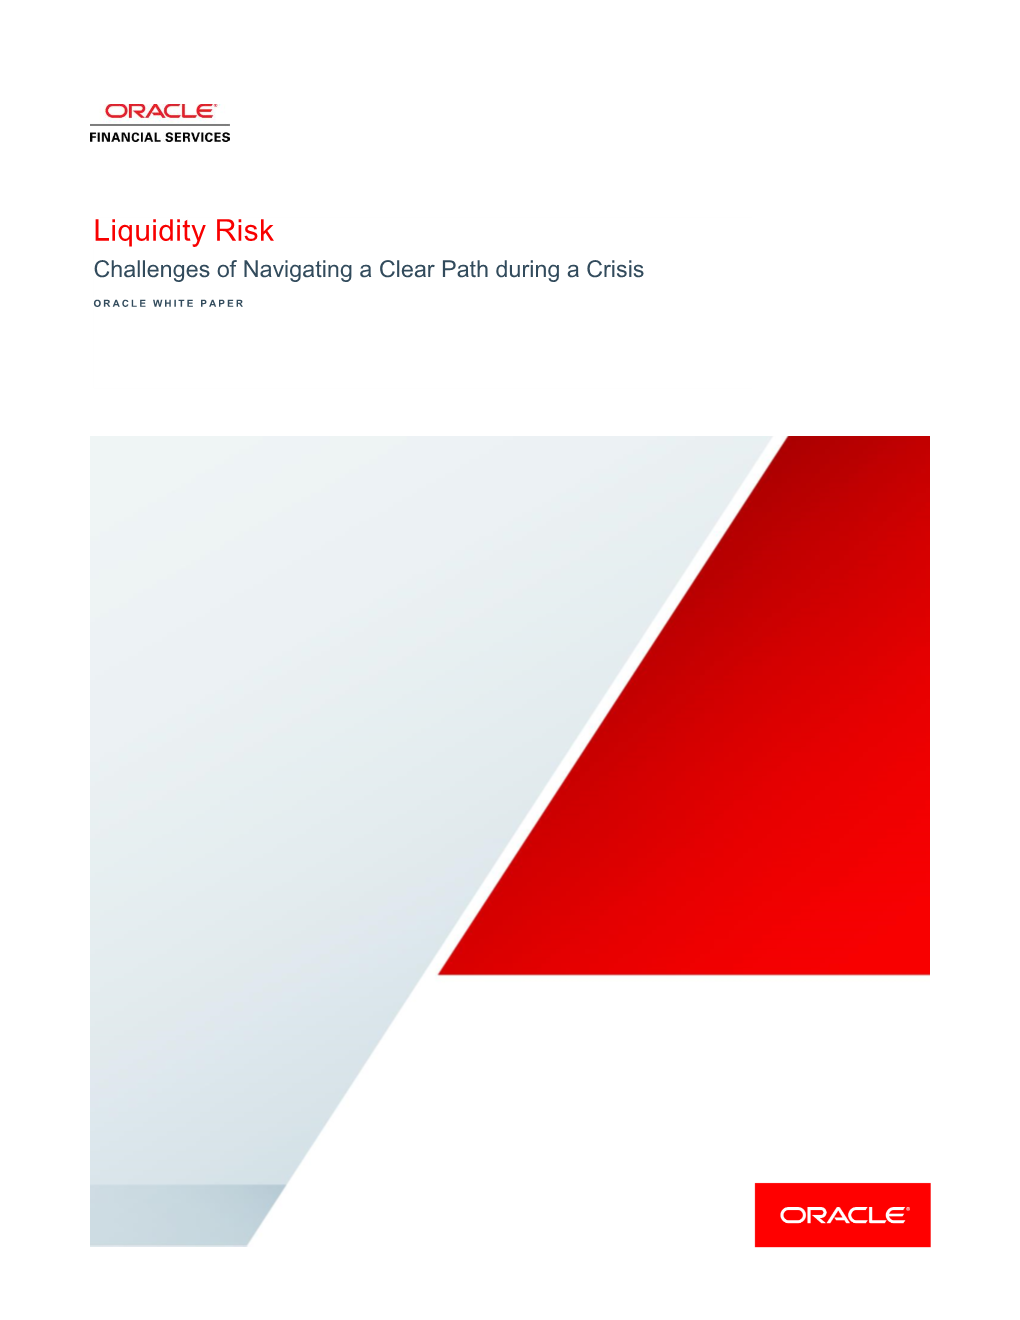 Liquidity Risk Challenges of Navigating a Clear Path During a Crisis